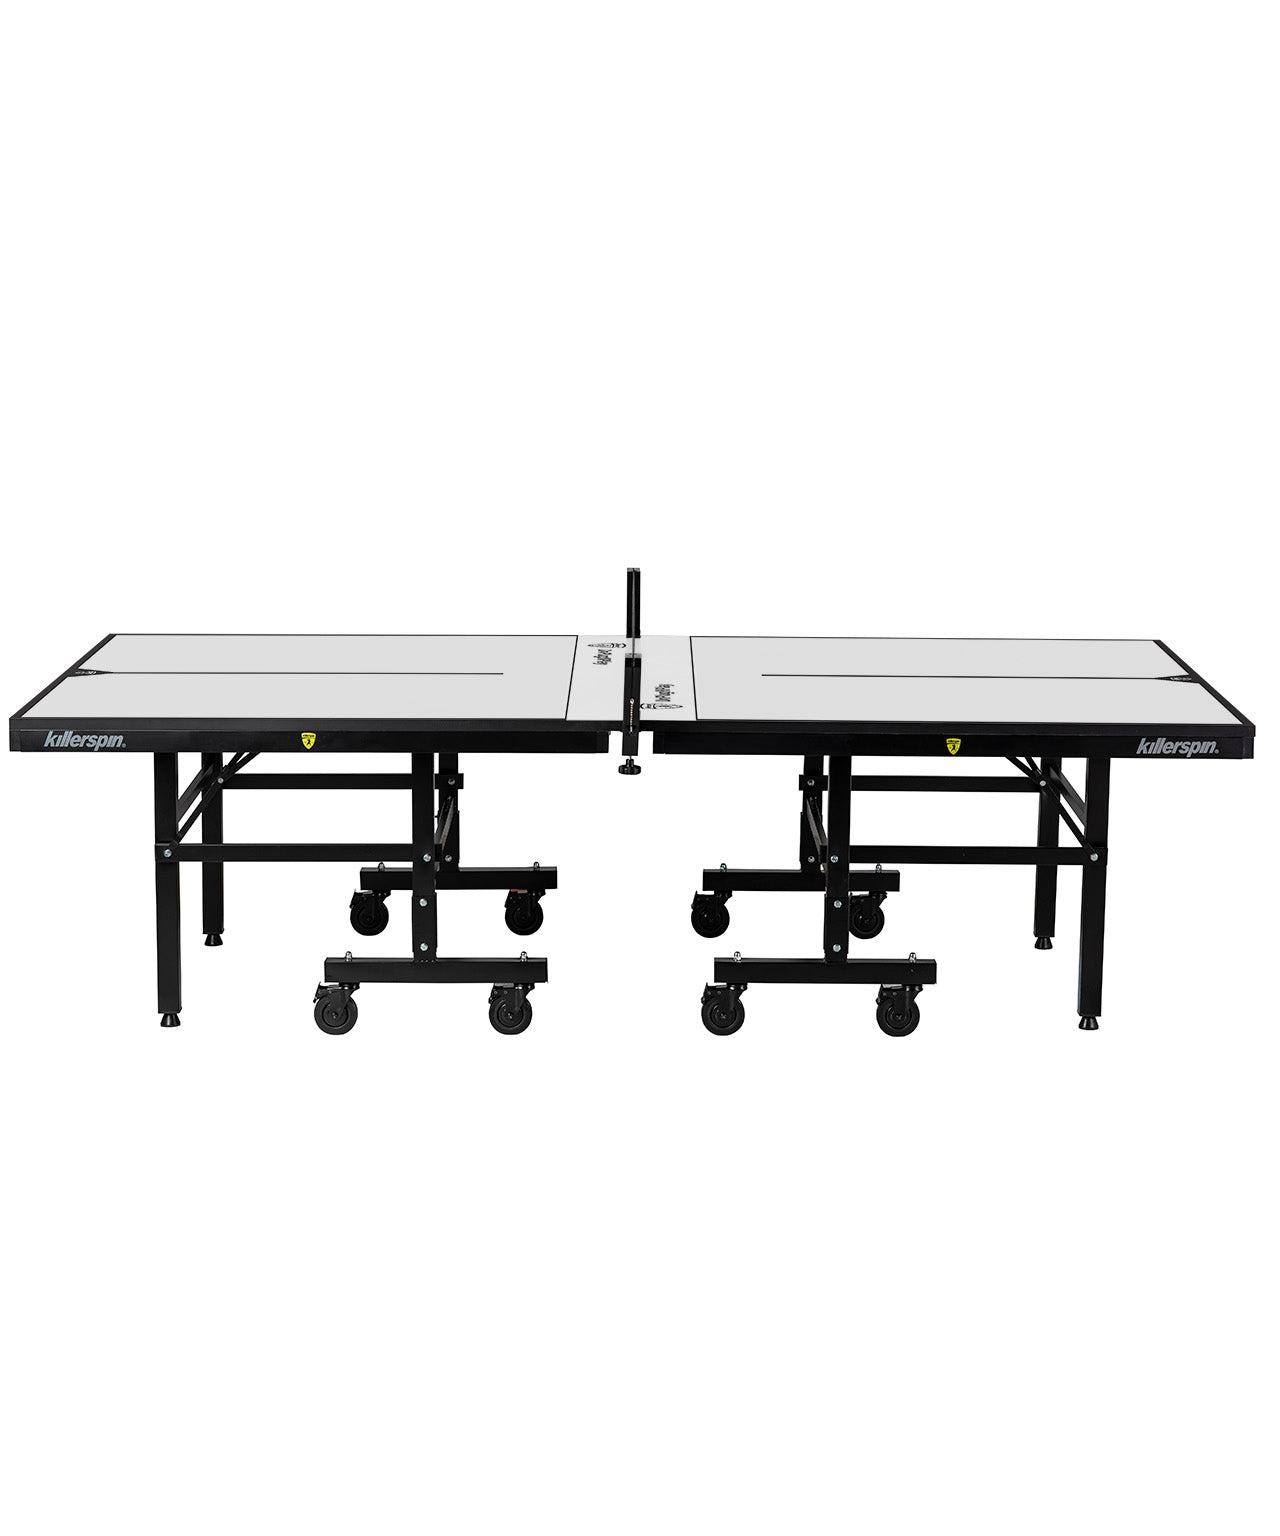 Killerspin Indoor Ping Pong Table UnPlugNPlay415 Max Vanilla Black frame White top model 2020 - side angle